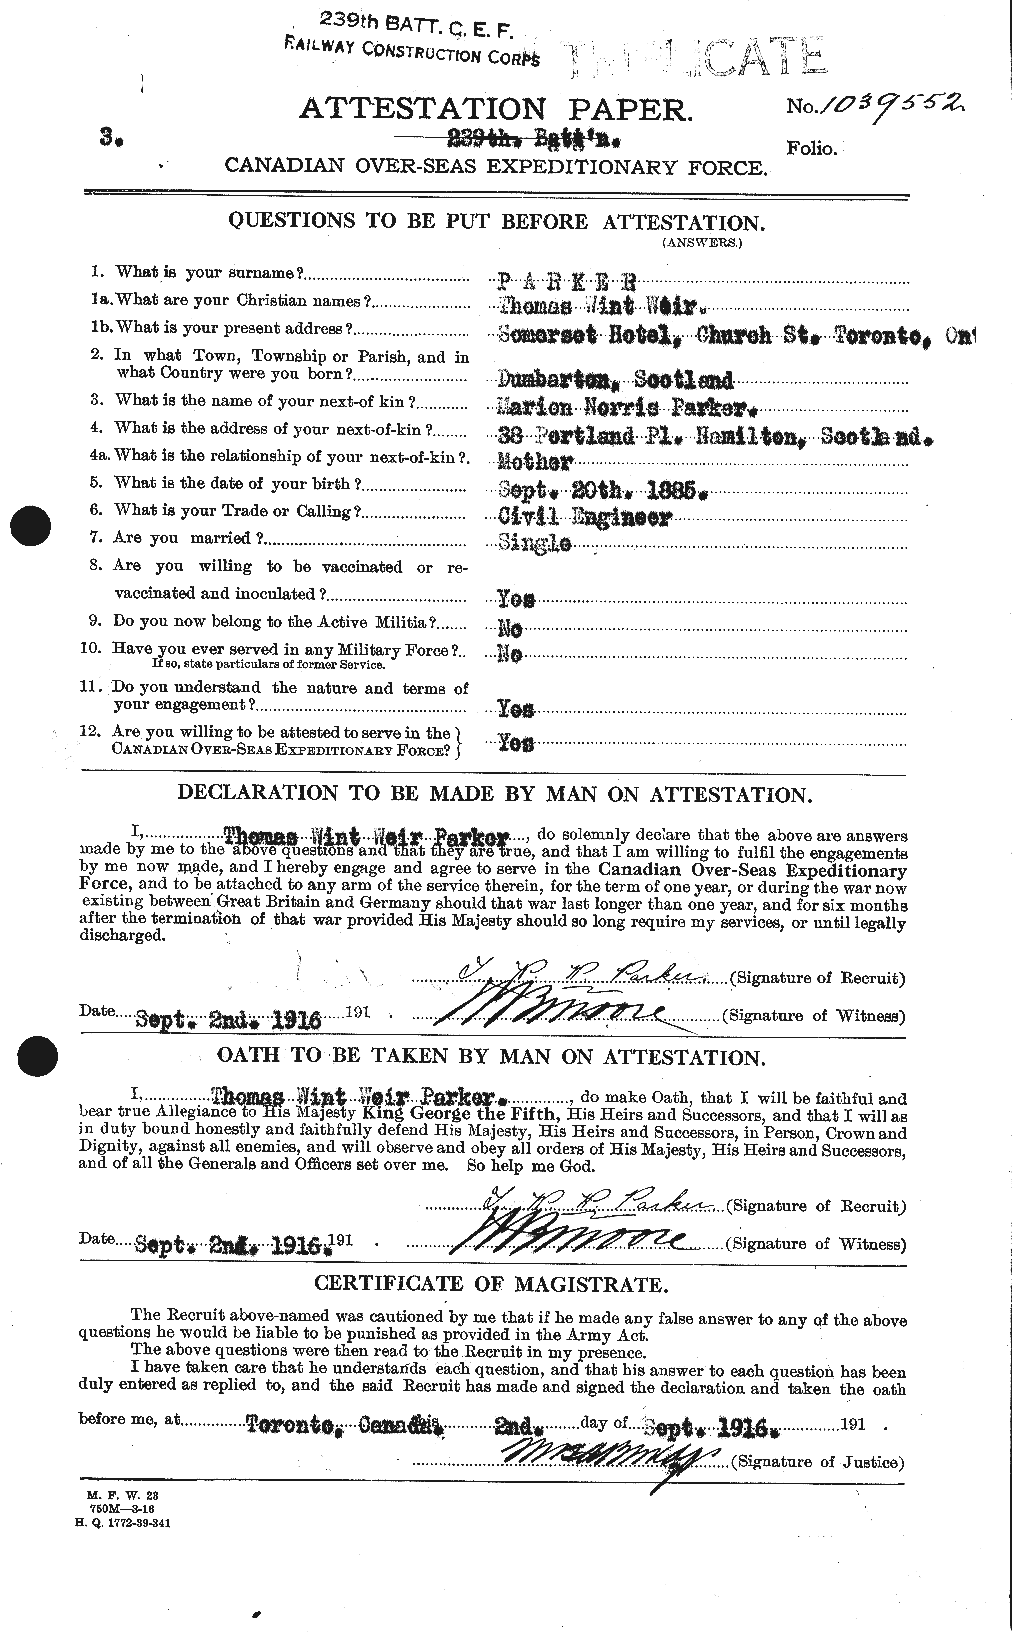 Personnel Records of the First World War - CEF 565673a